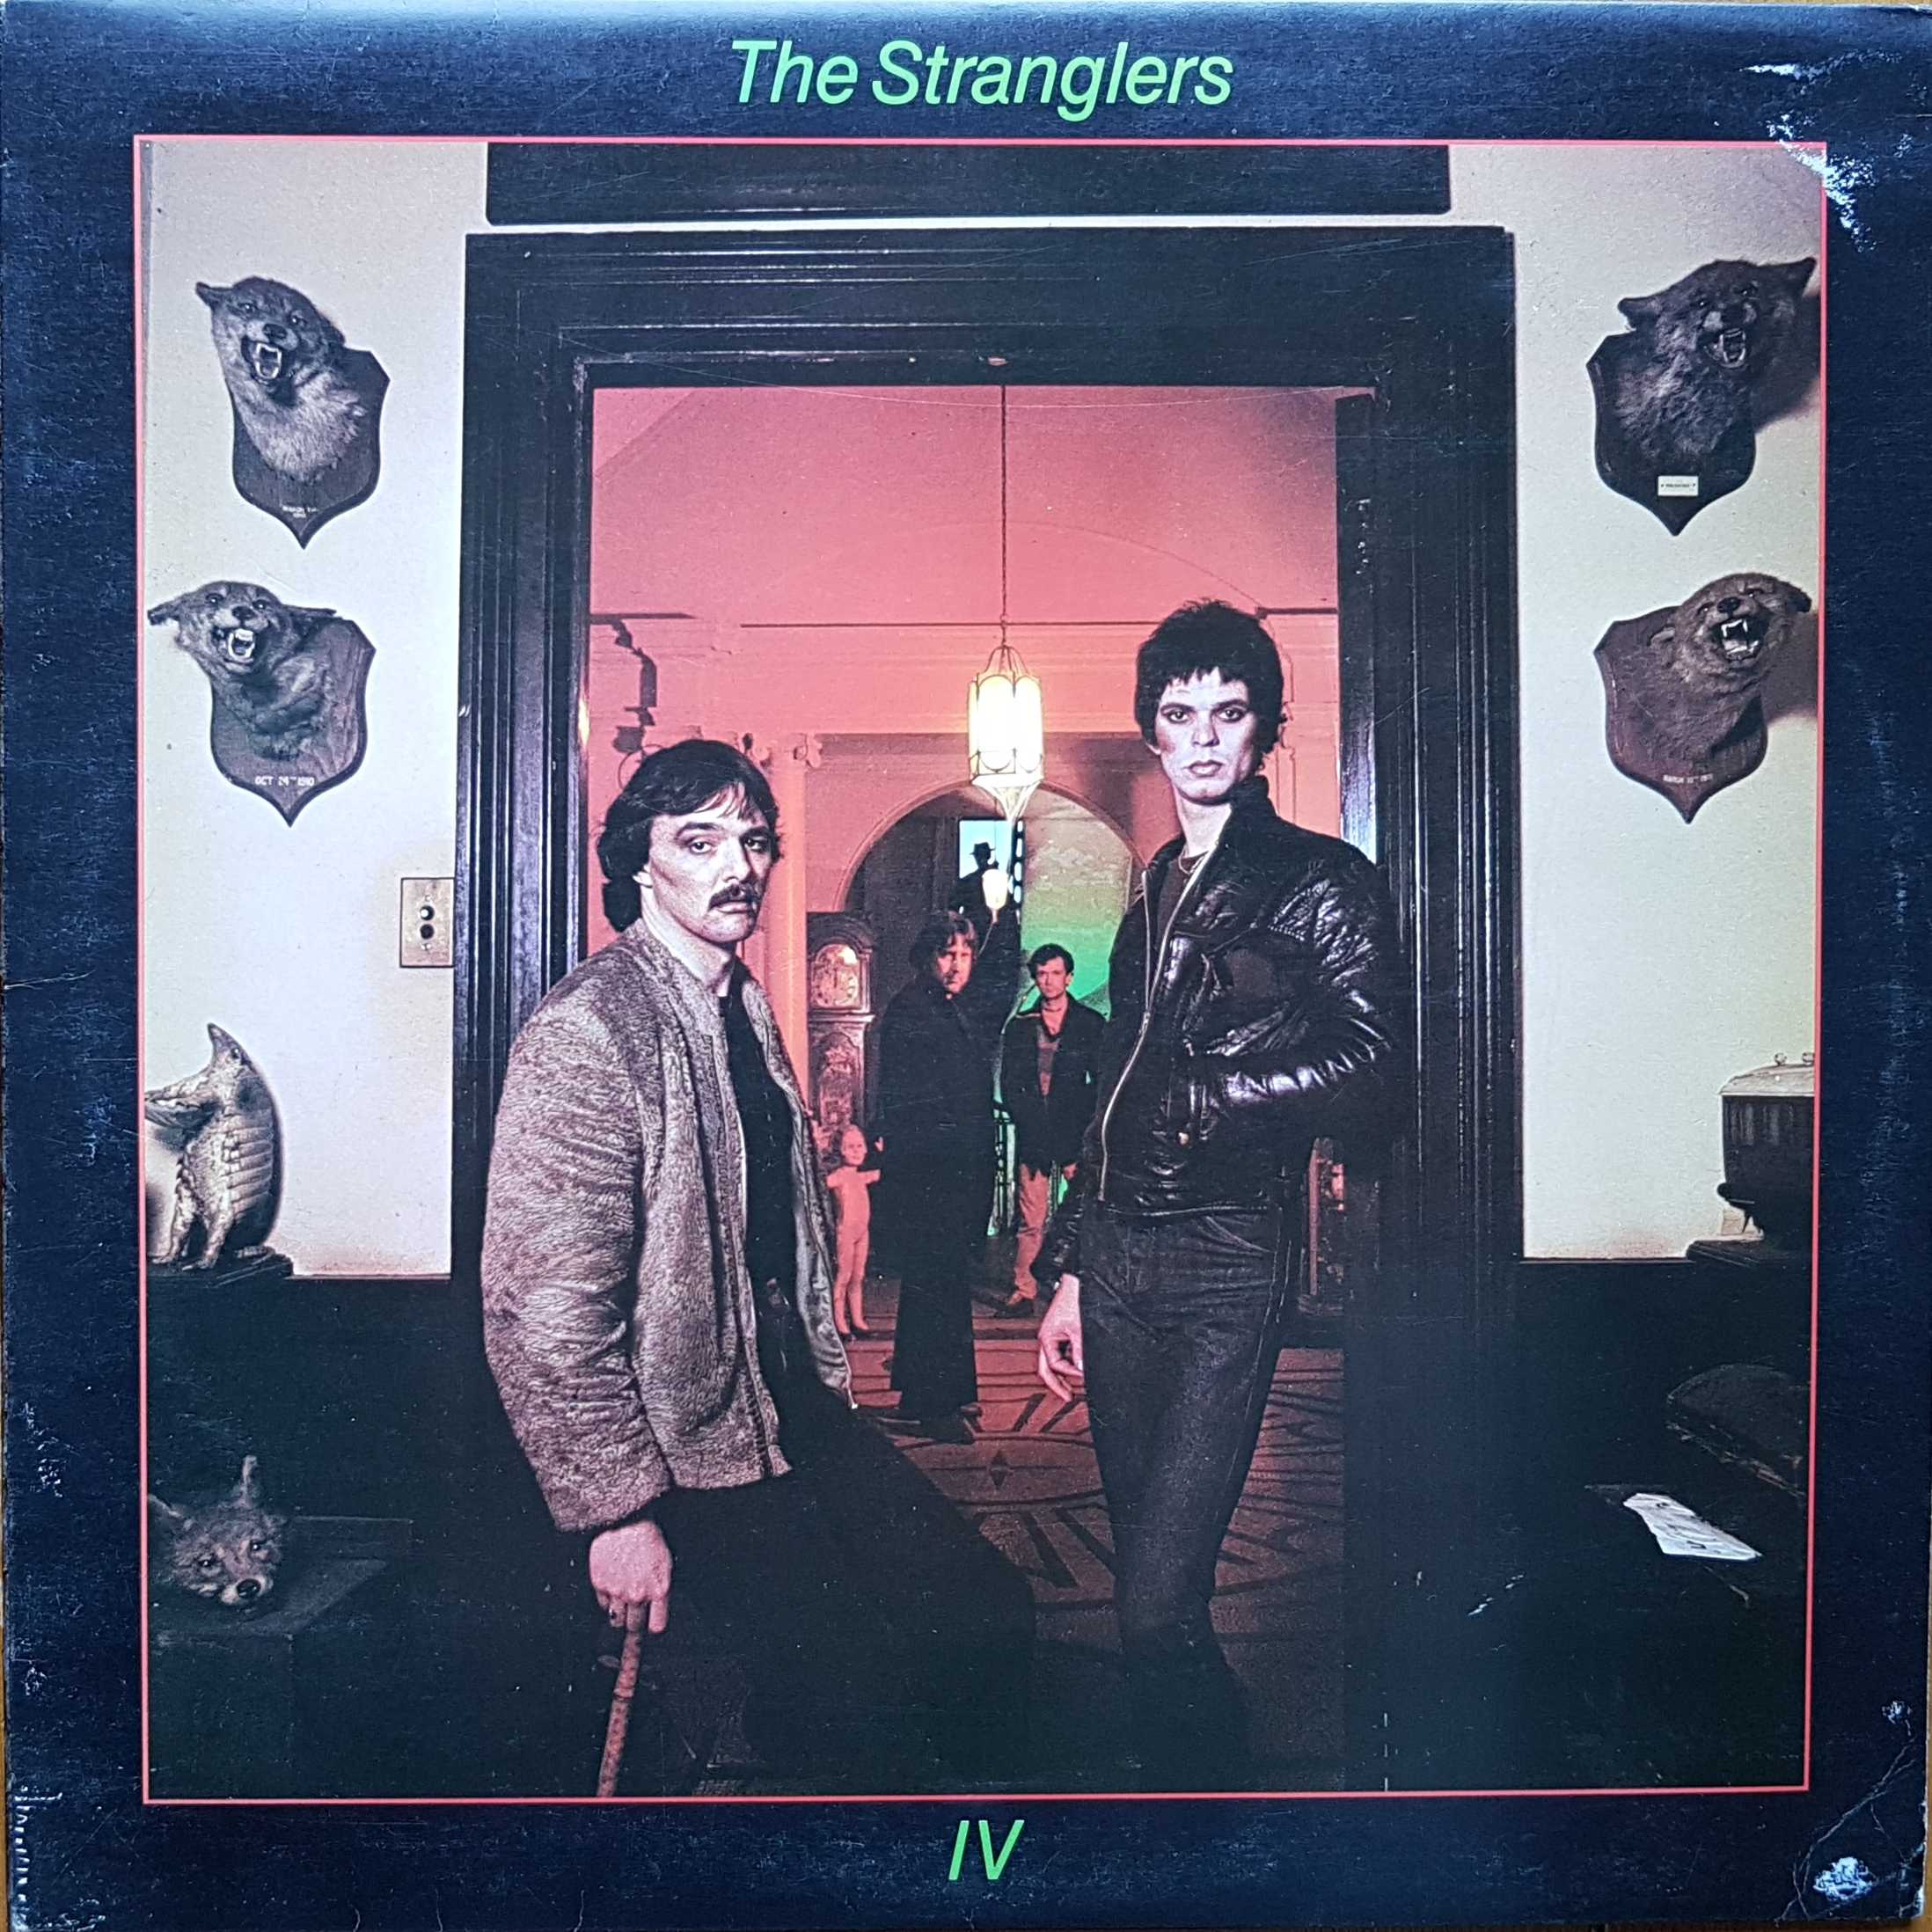 Picture of UAG 30045 Rattus norvegicus by artist The Stranglers  from The Stranglers albums